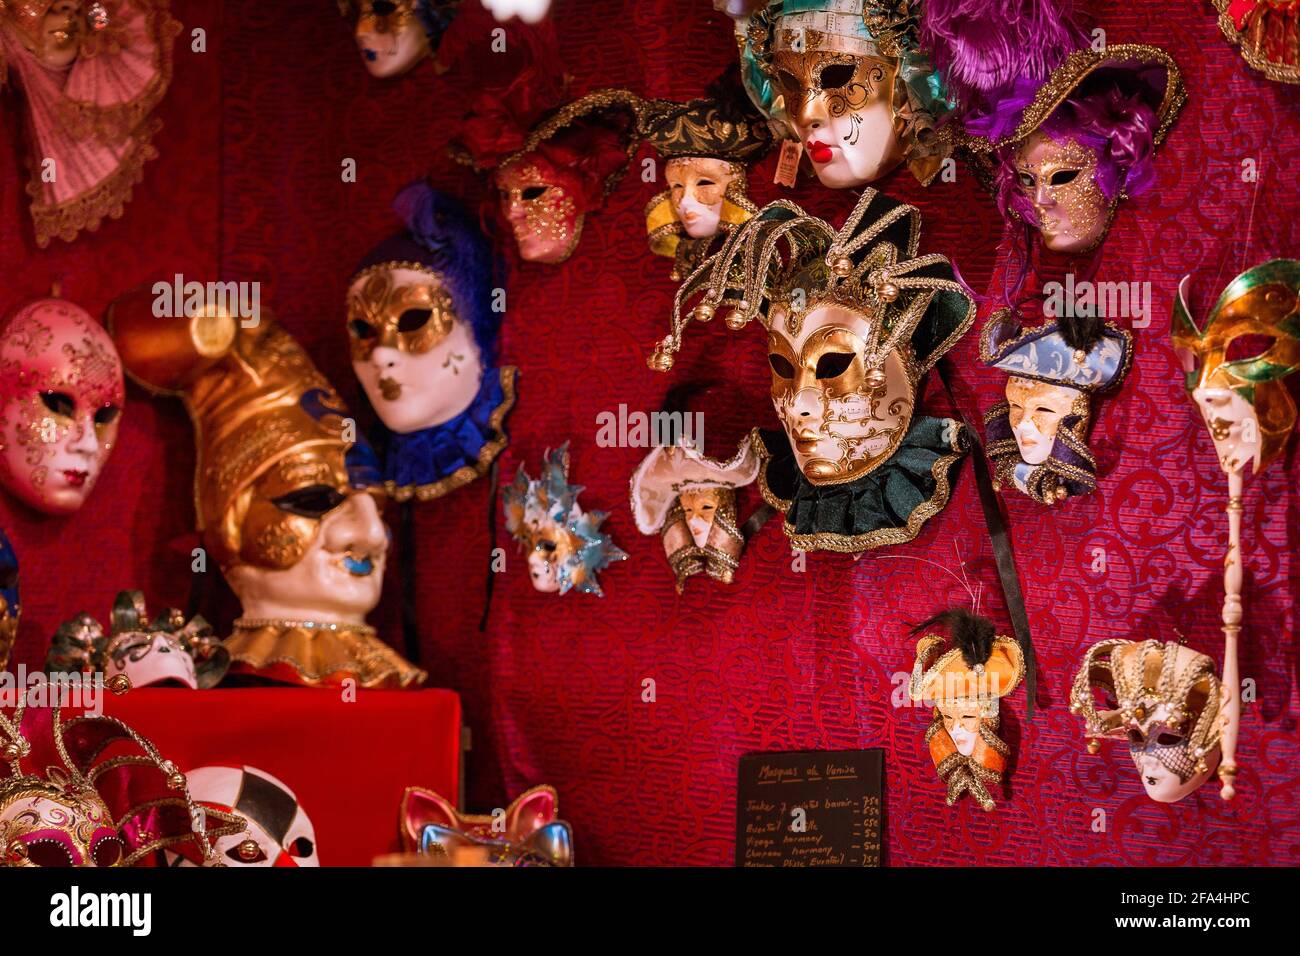 Colmar, France - December 22, 2014: Venetian masks inside one of the booths at the Colmar Christmas Market in Colmar, France. Stock Photo